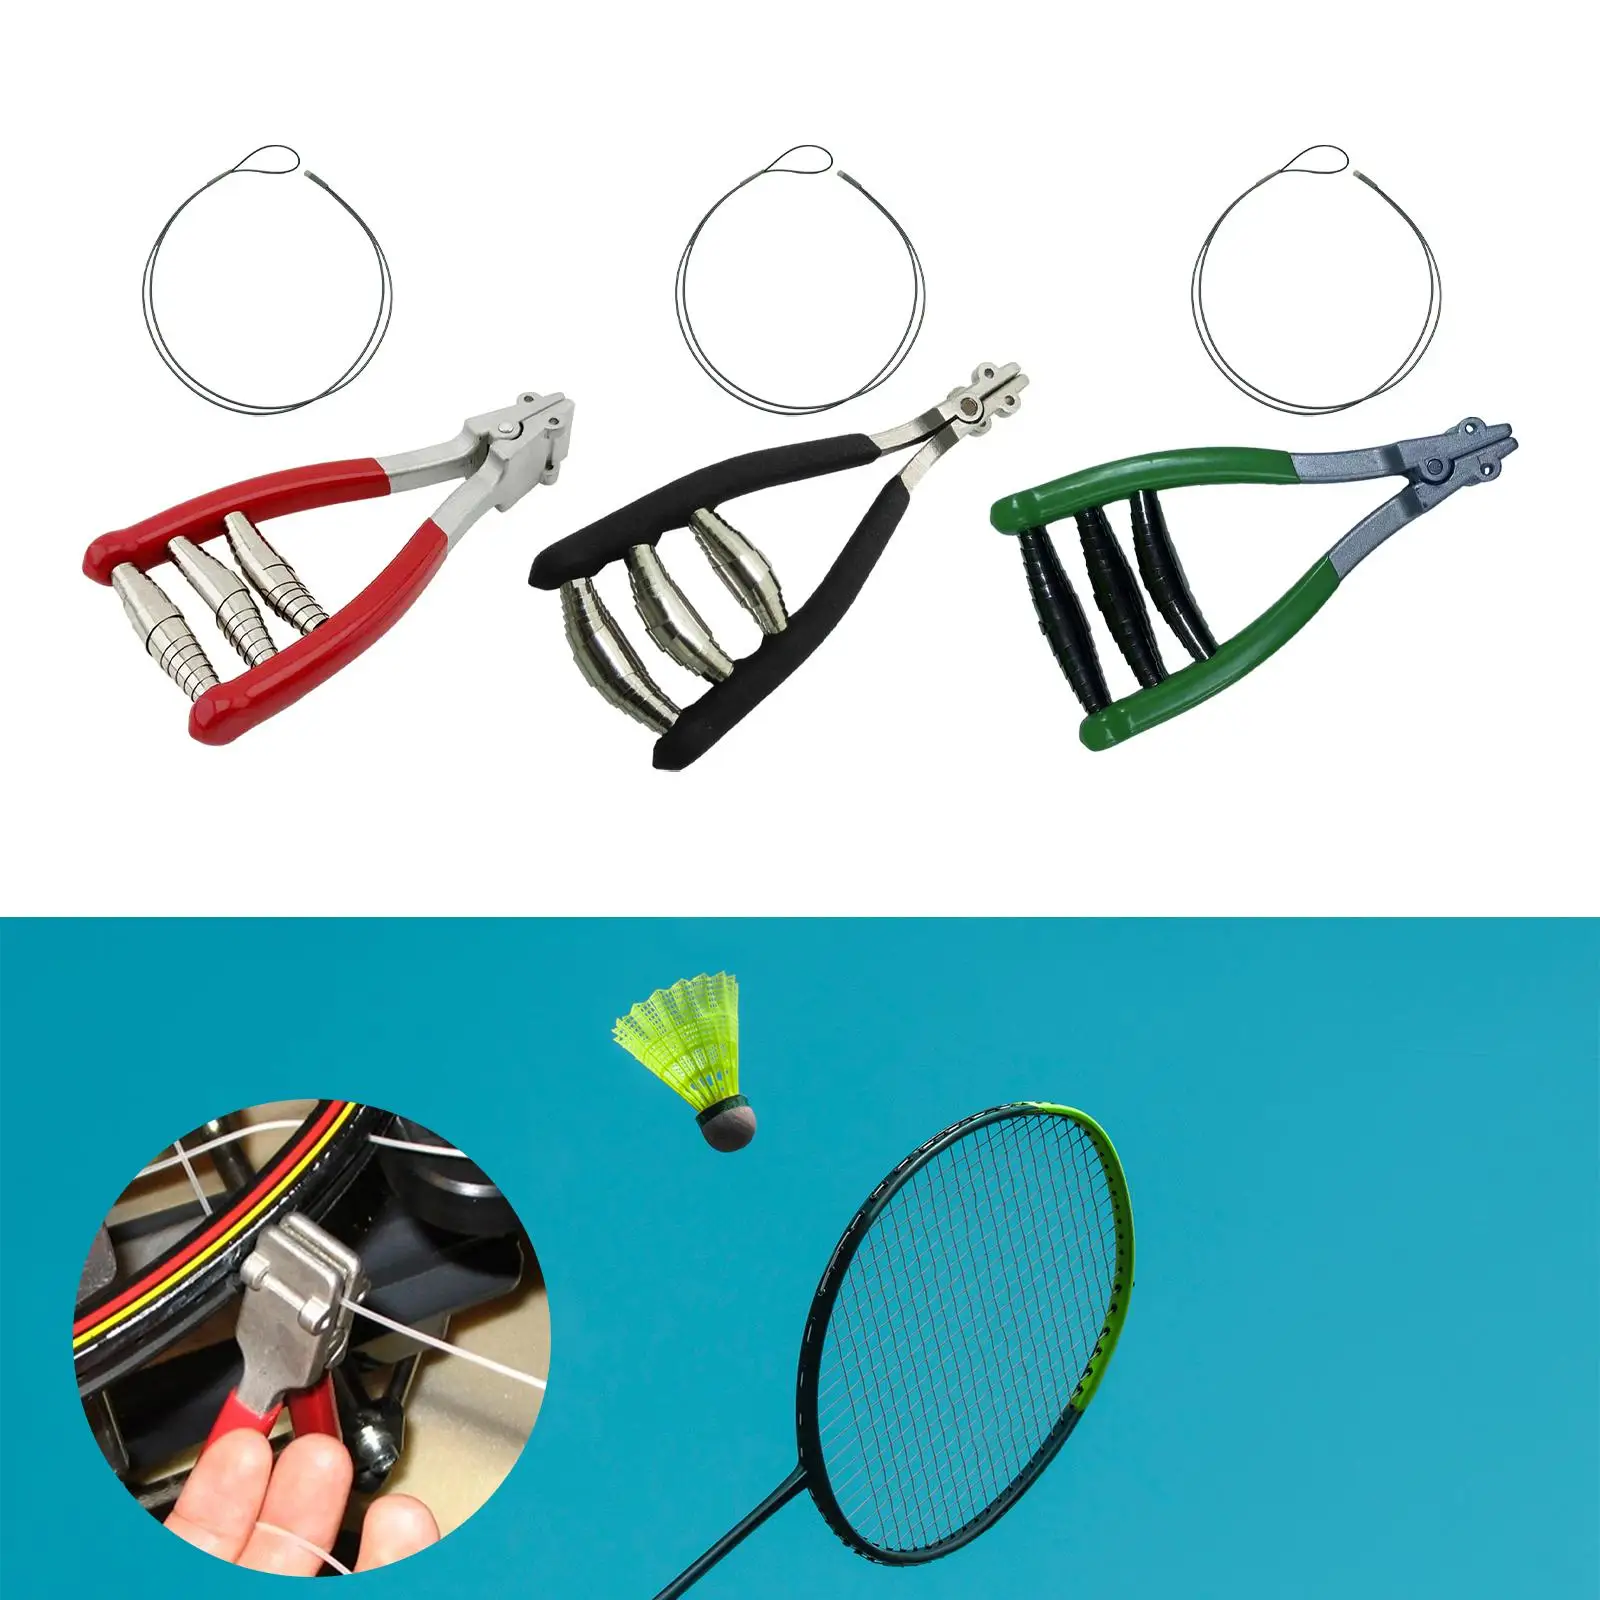 String Starting Clamp Stringing Clamp Sports Durable Wide Head Portable Stringing Tool for Tennis Badminton Squash Accessories